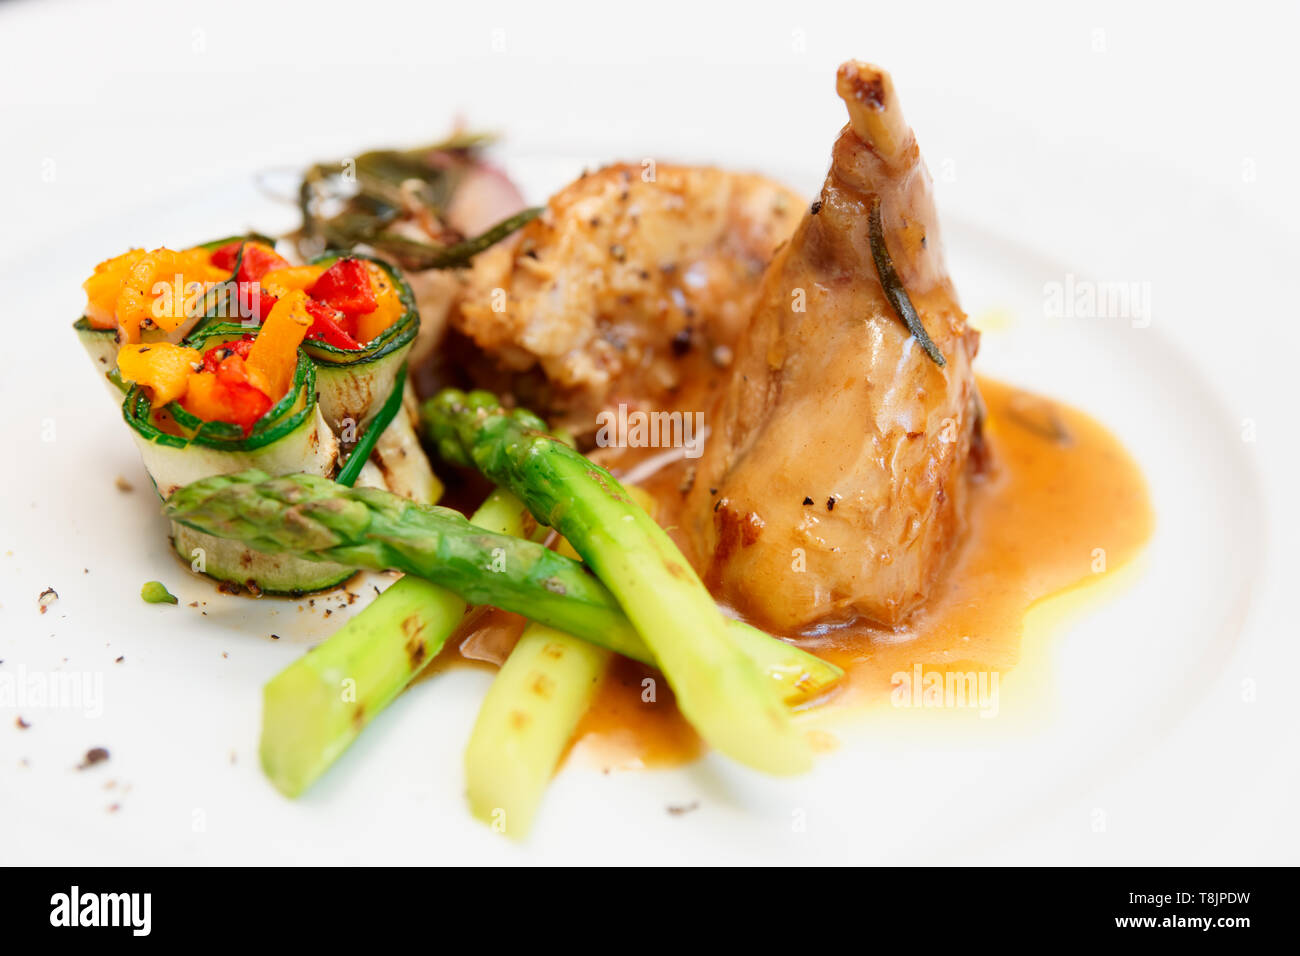 Rabbit stew with vegetables on plate Stock Photo